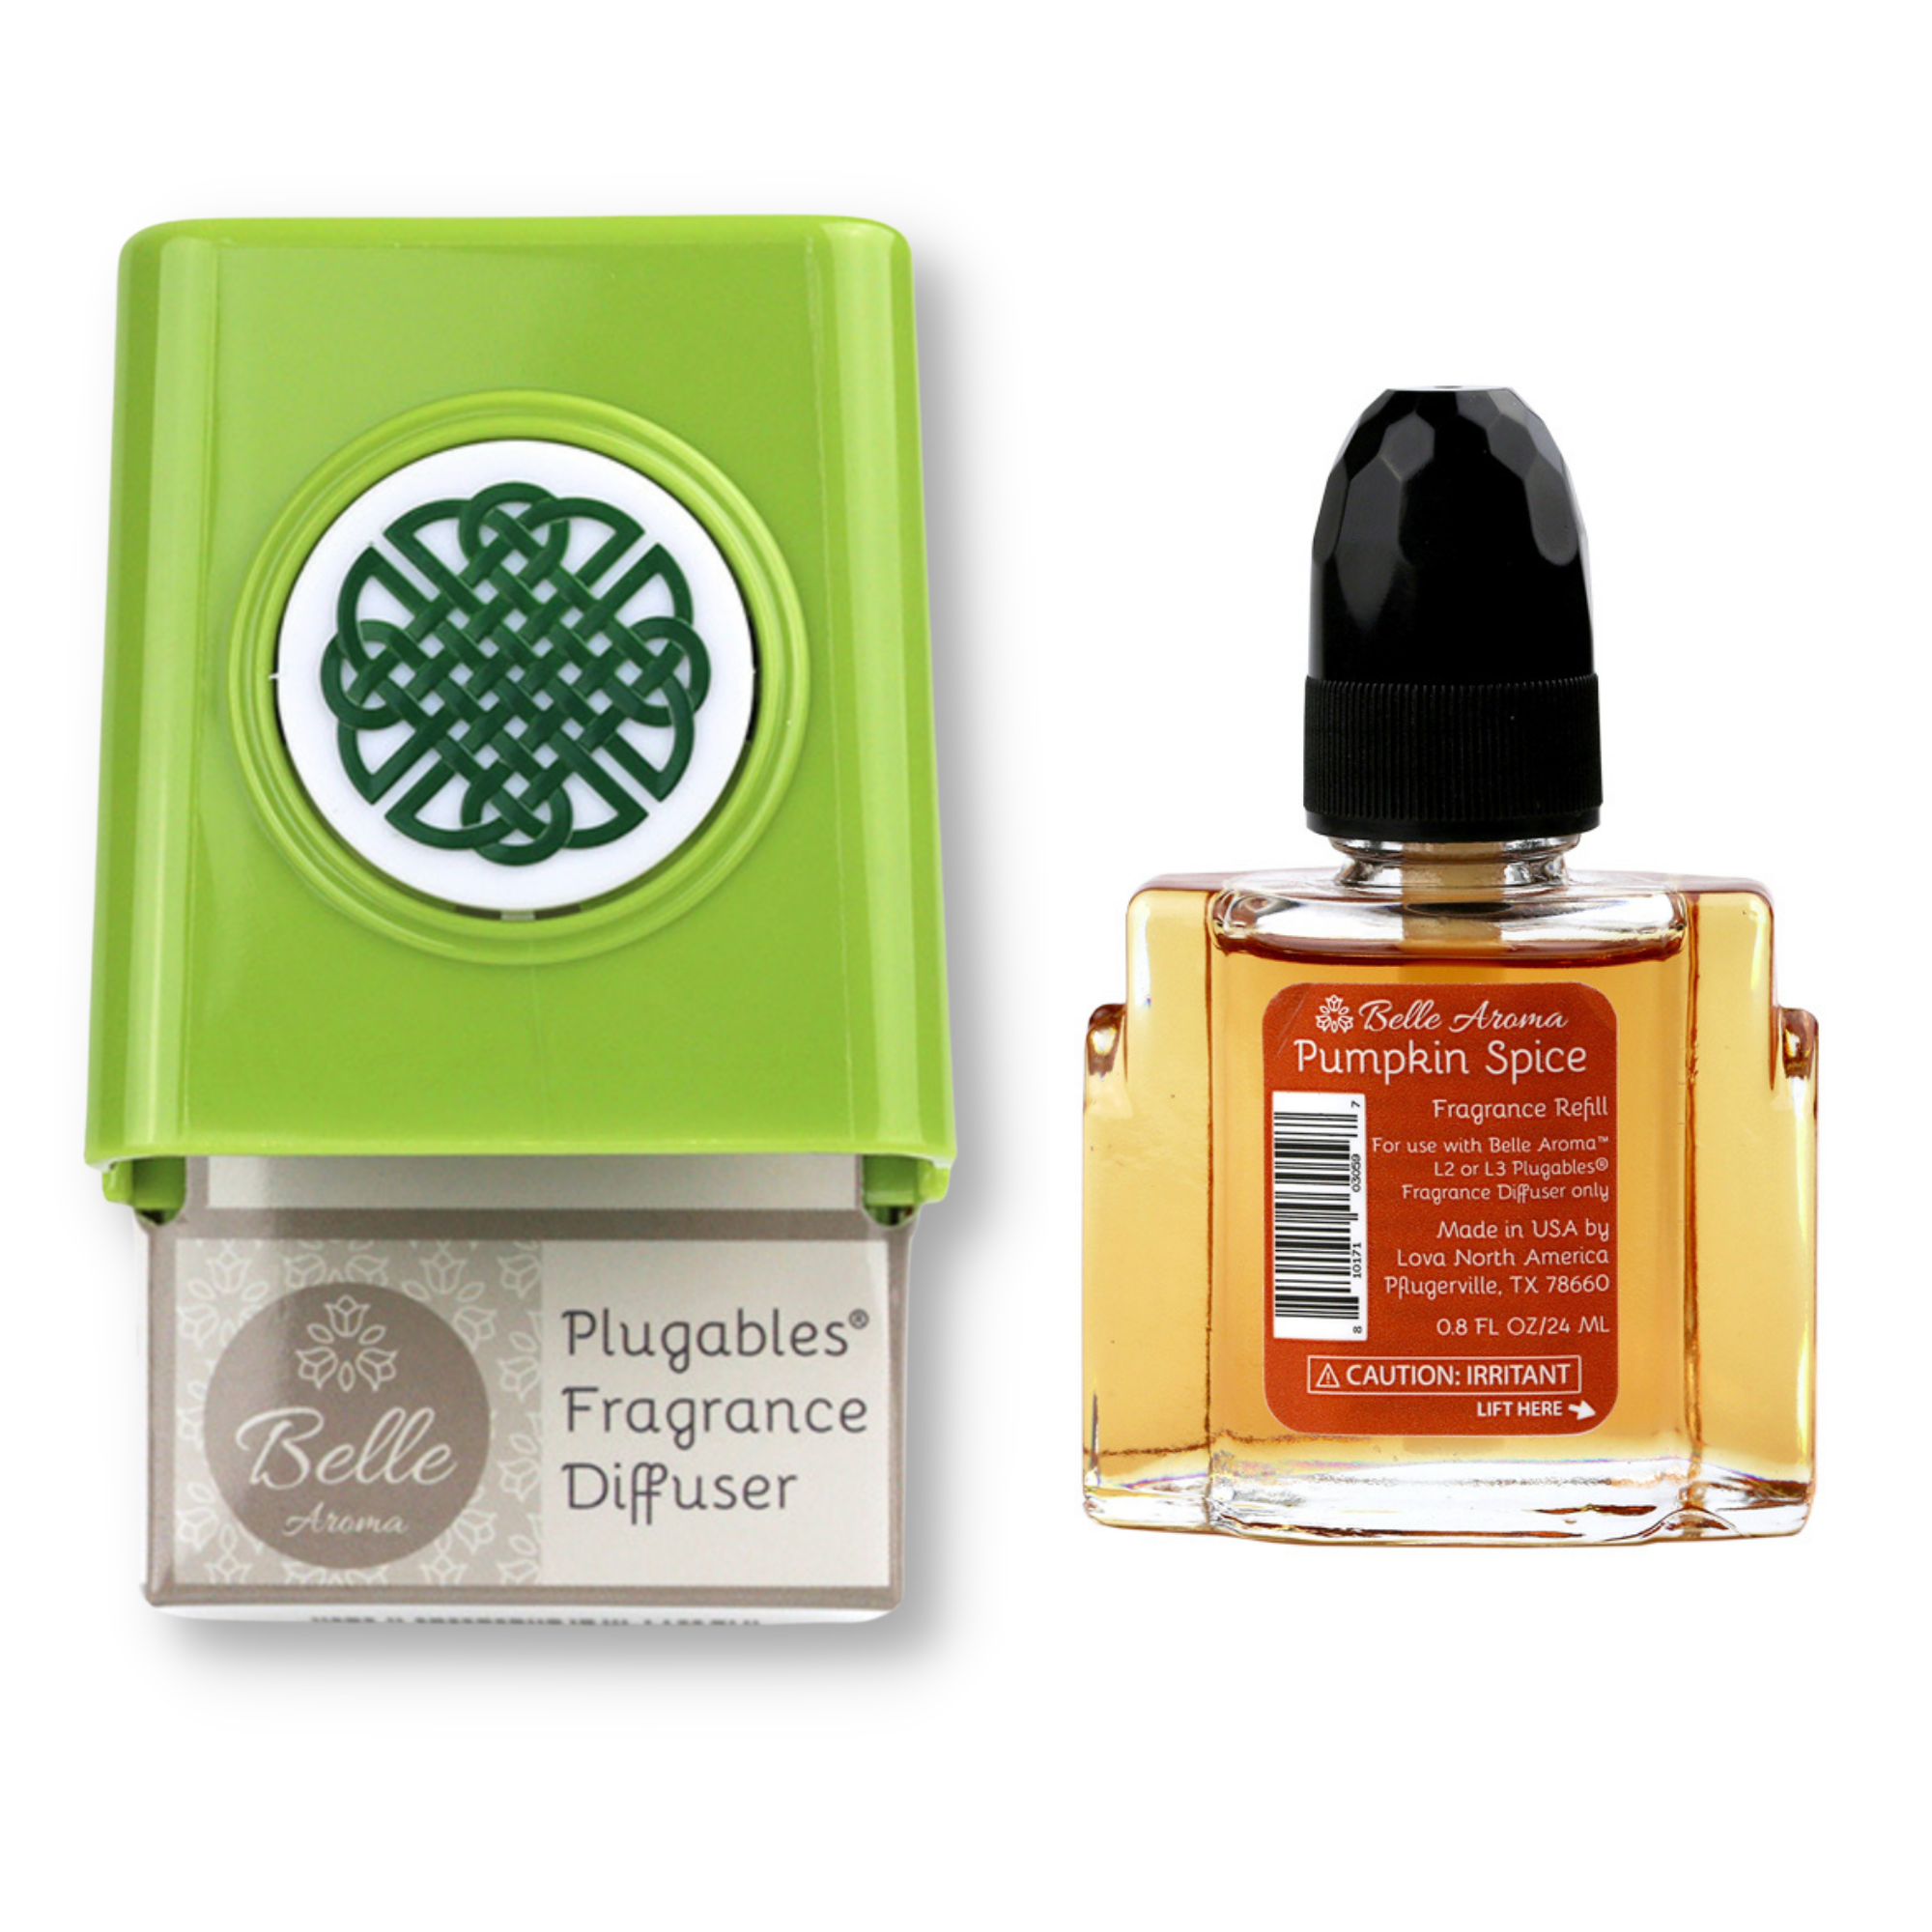 Celtic Knot Medallion Plugables® Plugin Aromalectric® Scented Oil Diffuser - Granny Smith with Pumpkin Spice Fragrance Oil Home Fragrance Accessories